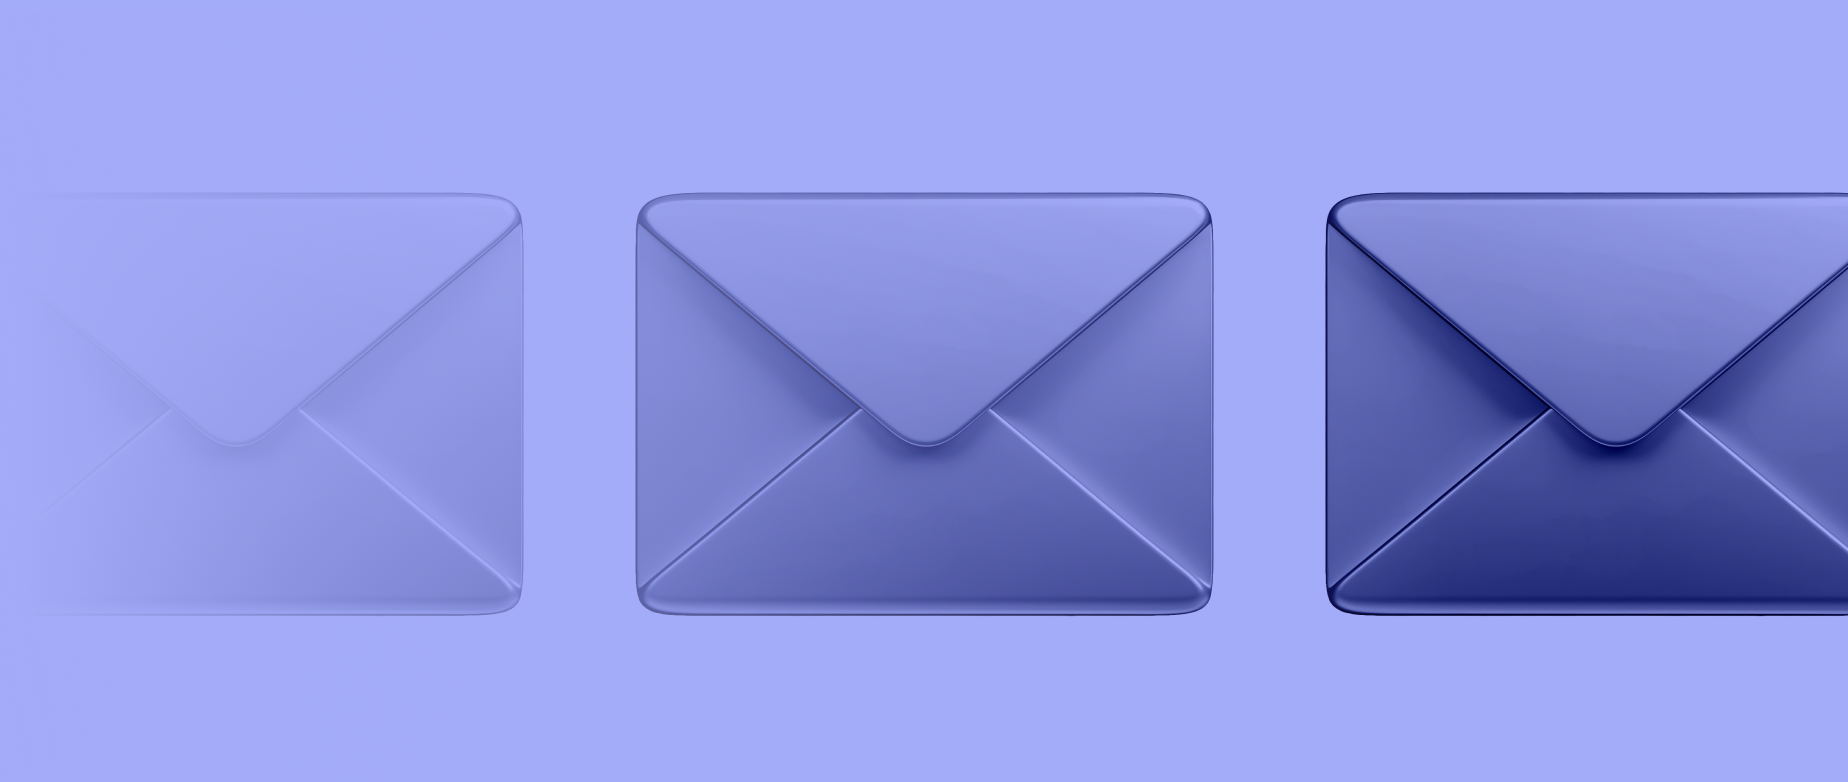 Three envelopes next to each other becoming less transparent from left to right on a purple background.